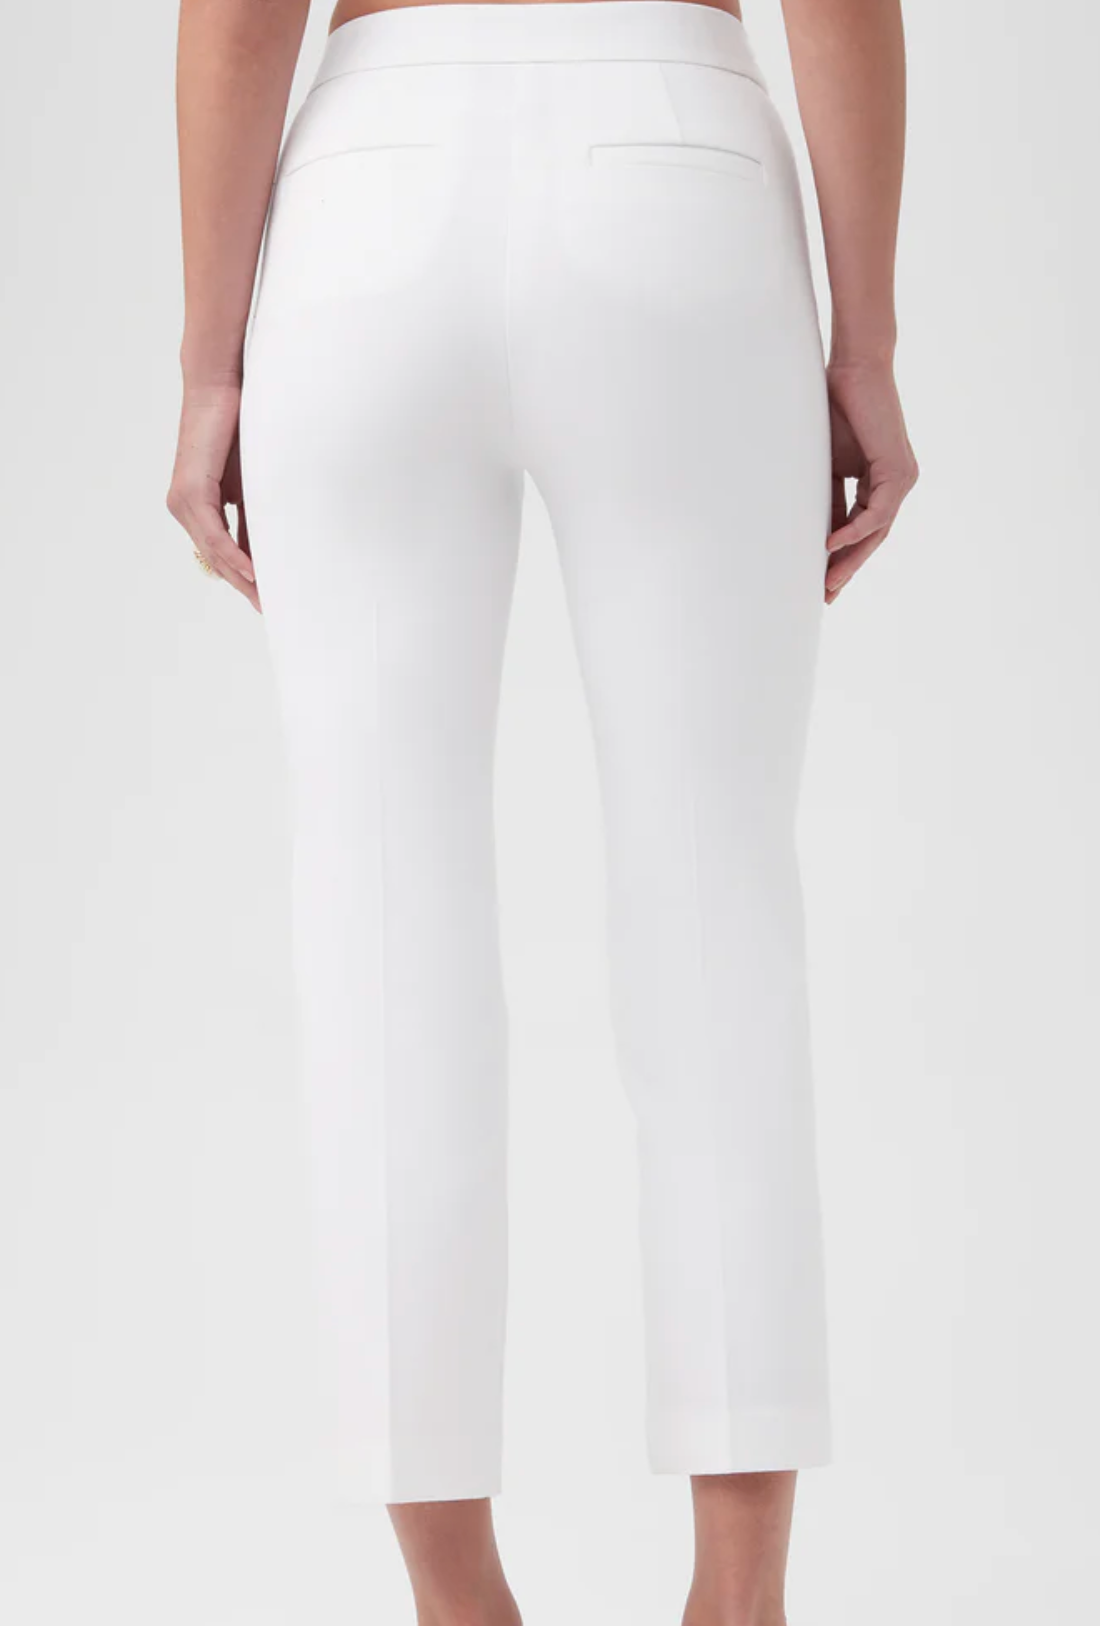 Lulu Pant in White - The French Shoppe